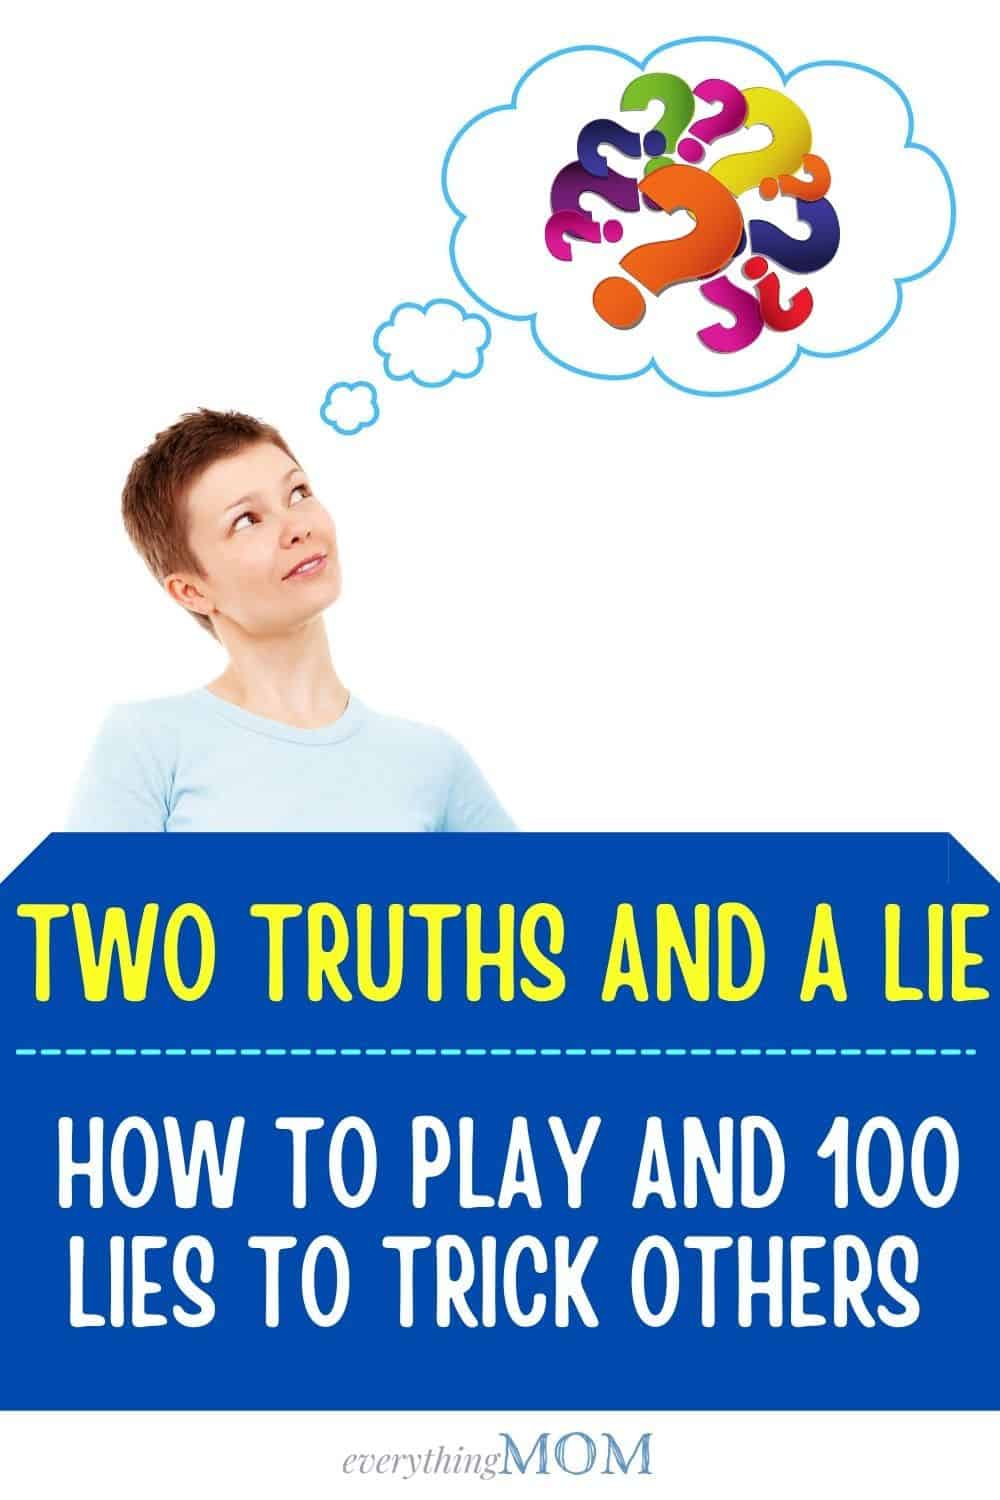 Two Truths and a Lie: How to Play and 100 Lies to Trick Others |  EverythingMom